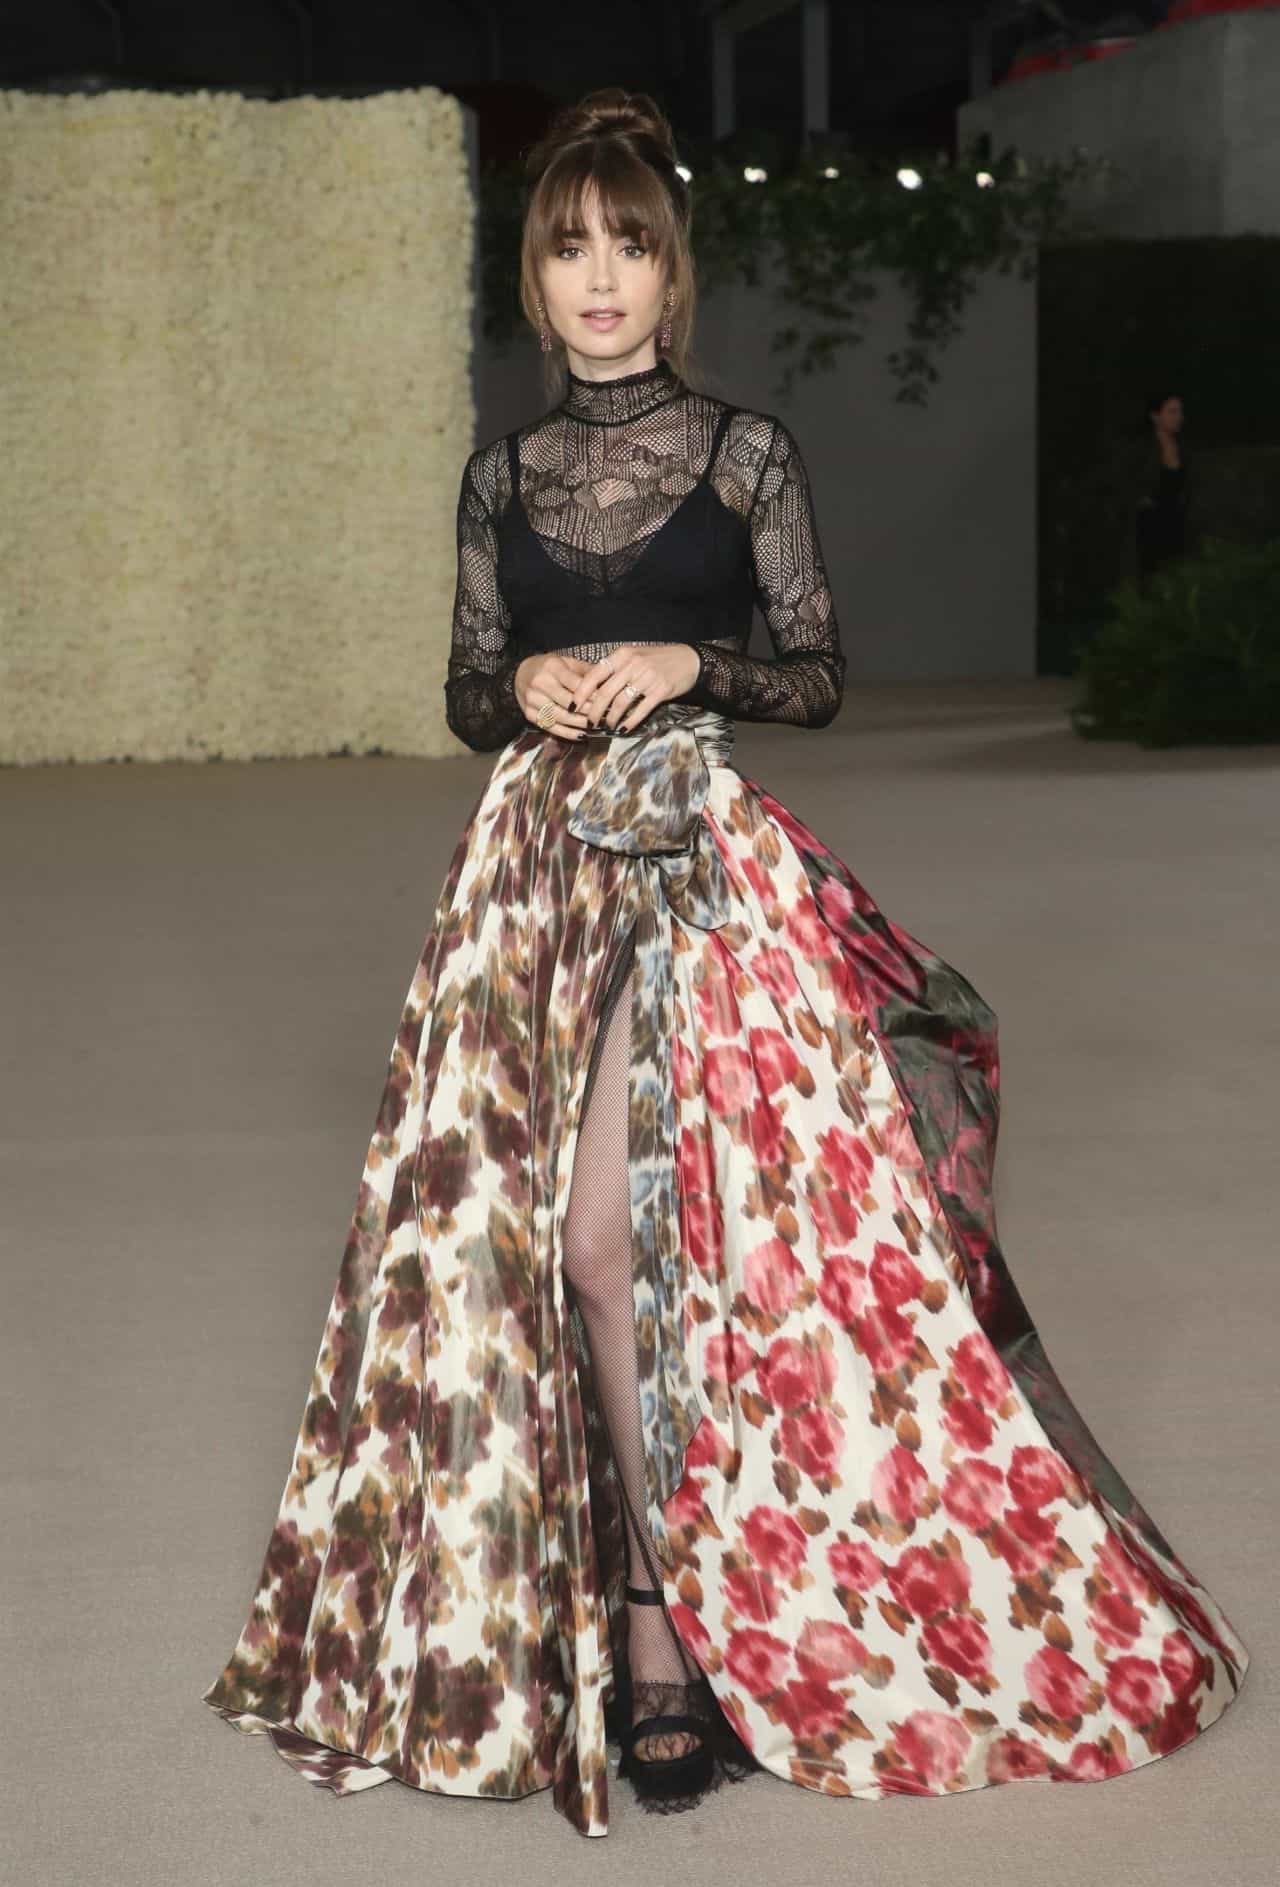 Lily Collins Put on a Leggy Display in Dior Skirt at Academy Museum Gala